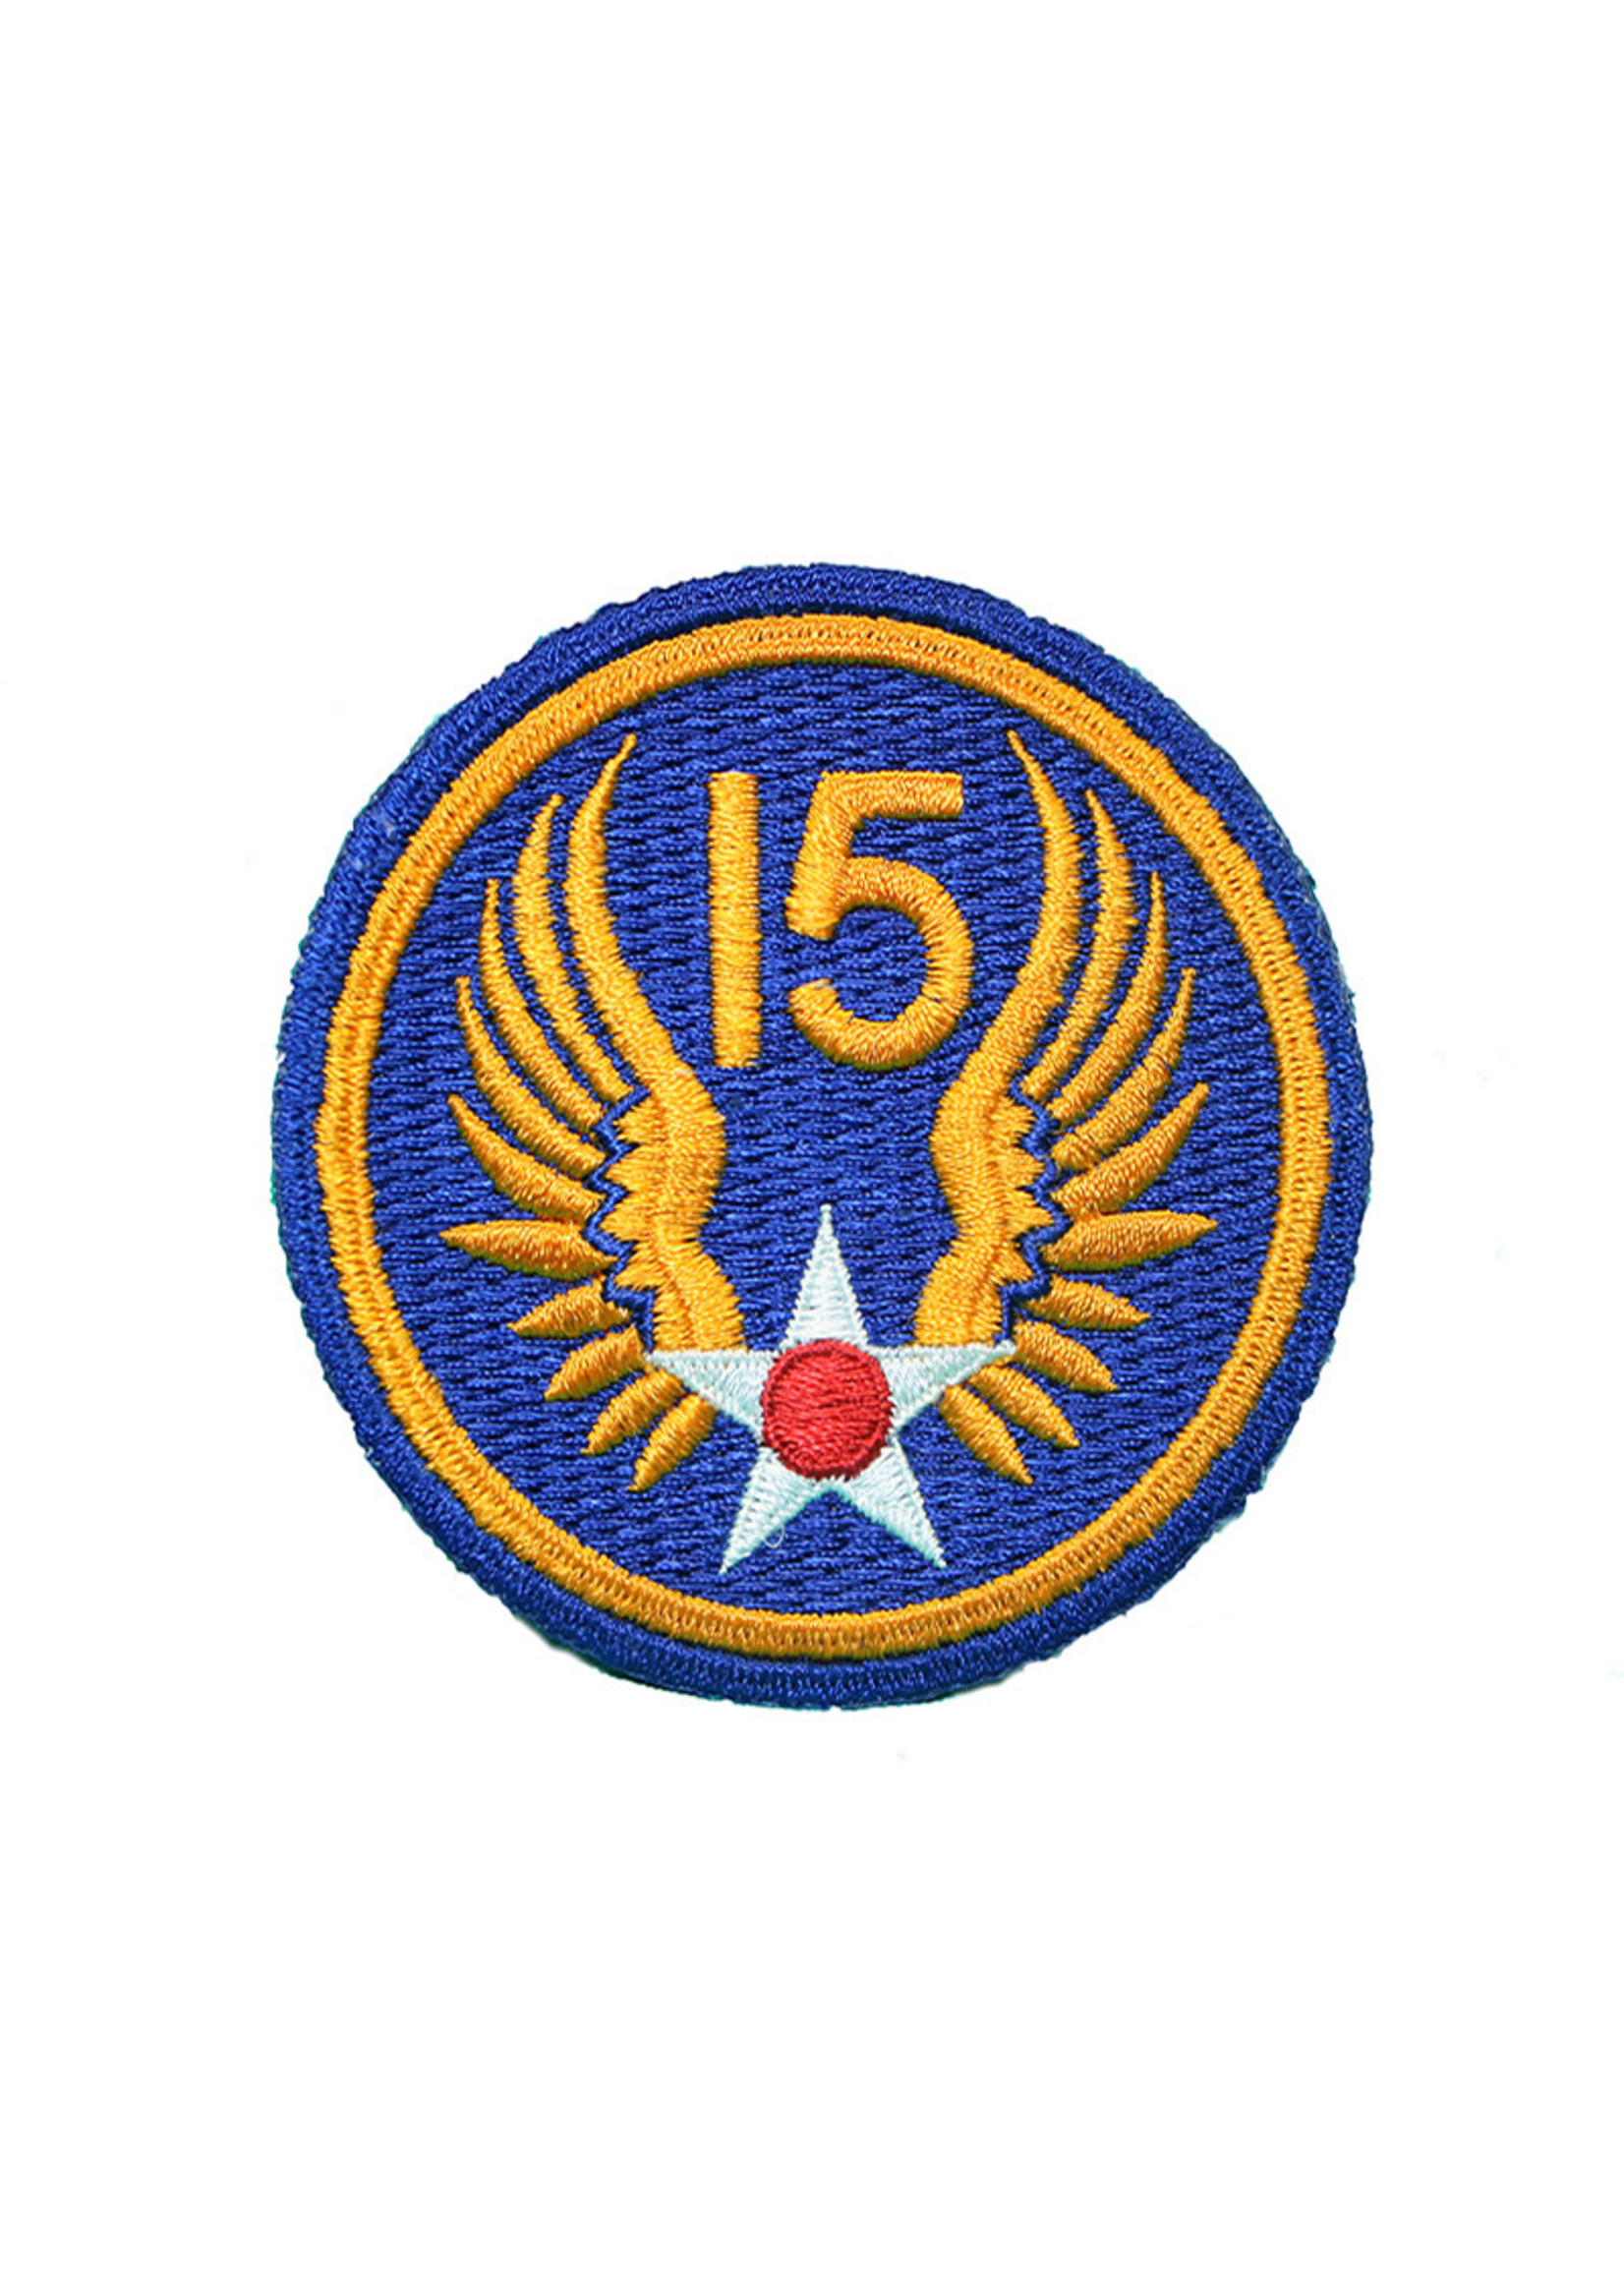 Robert Seifert Patches Patch 15th Air Force WWII